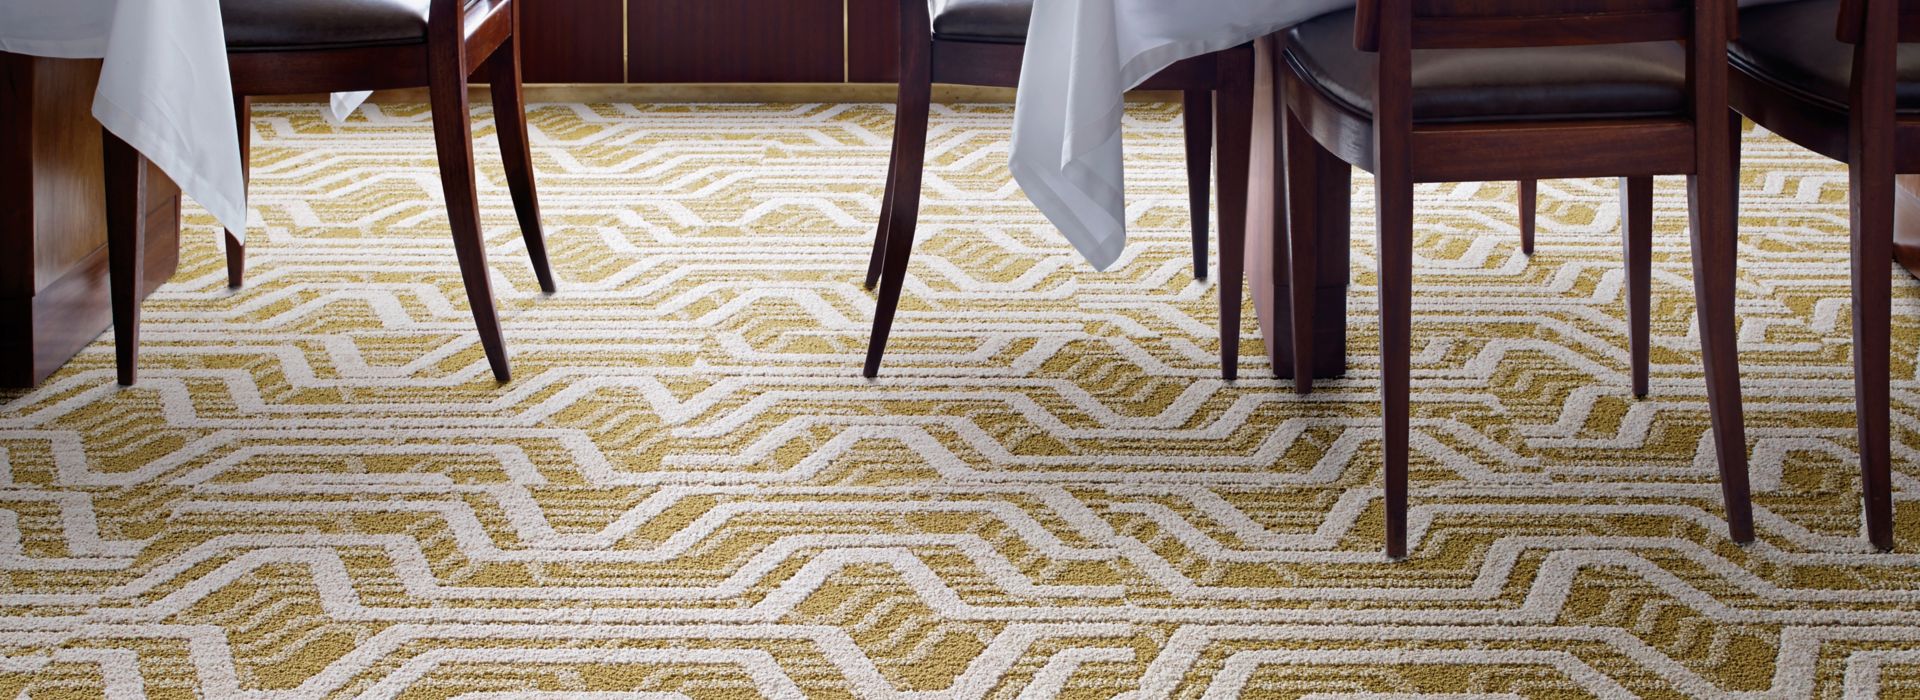 Interface PM01 and PM19 plank carpet tile in upscale dining area imagen número 1